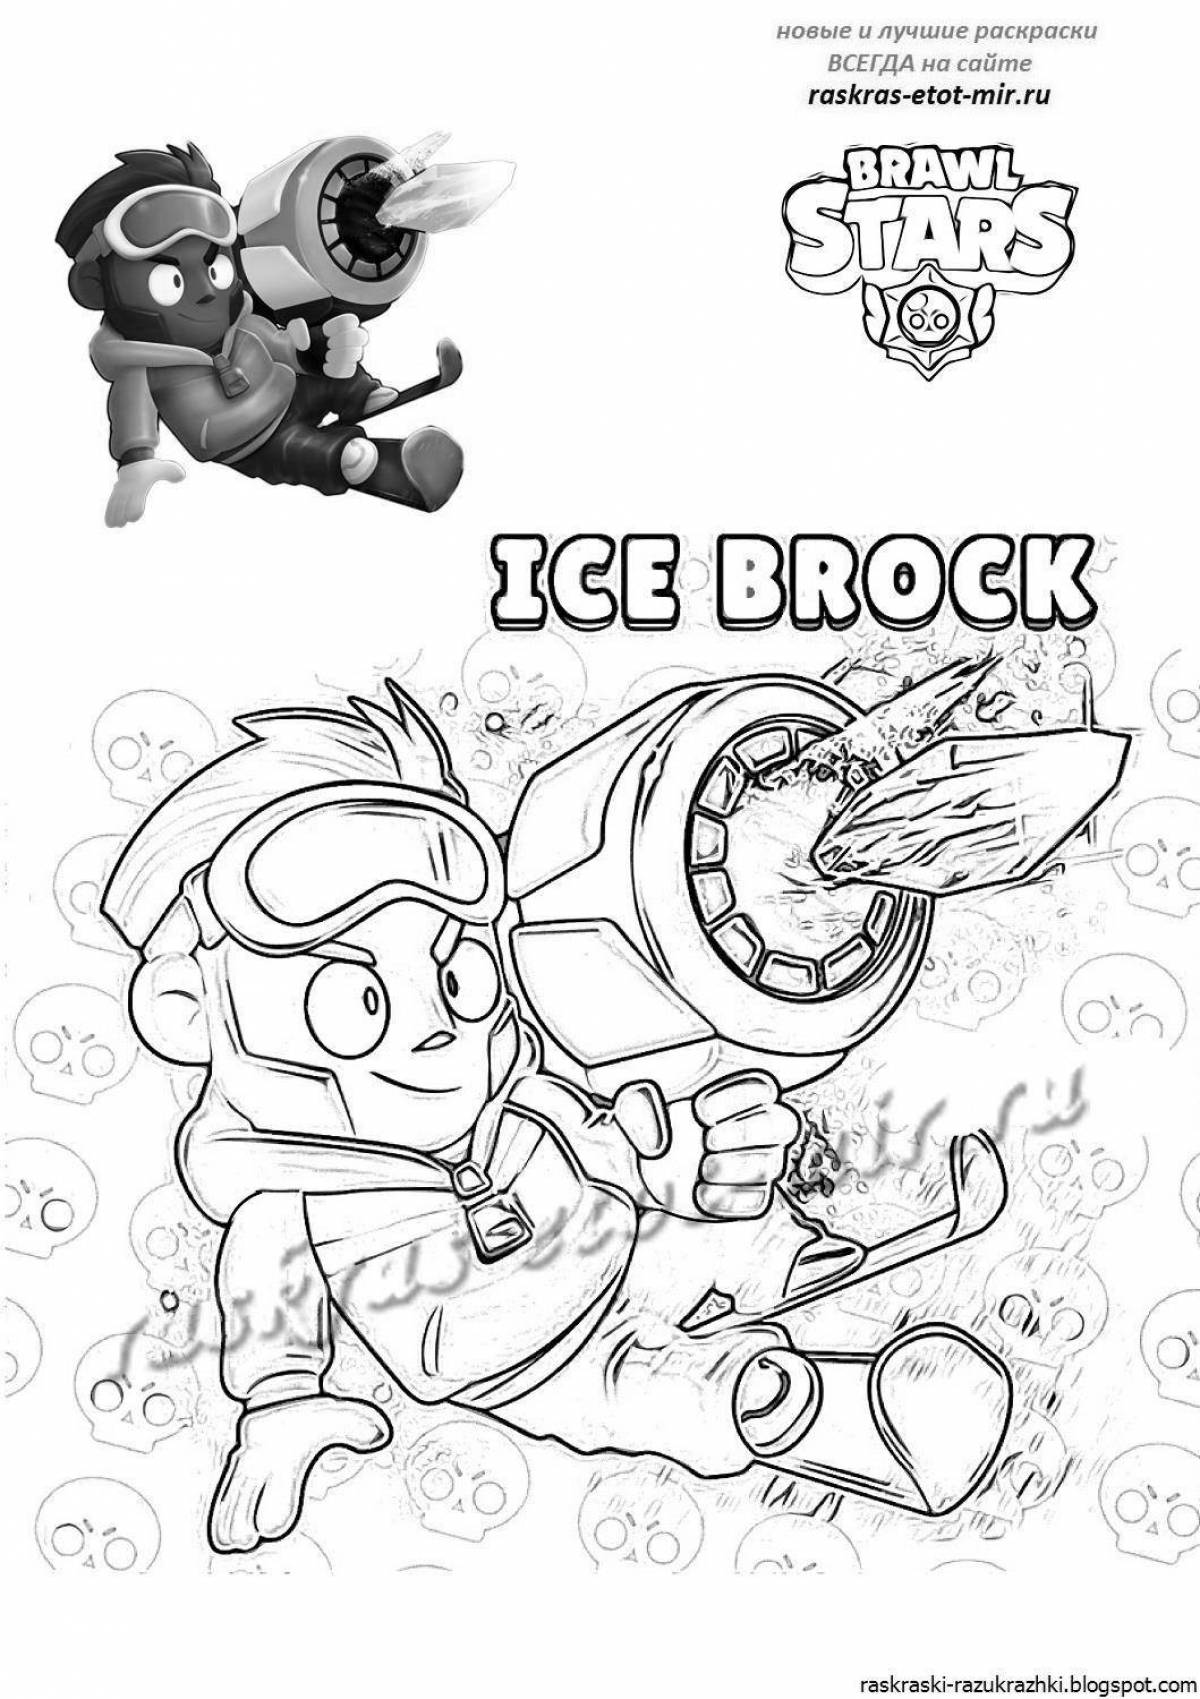 Colorful Brock from brawl stars